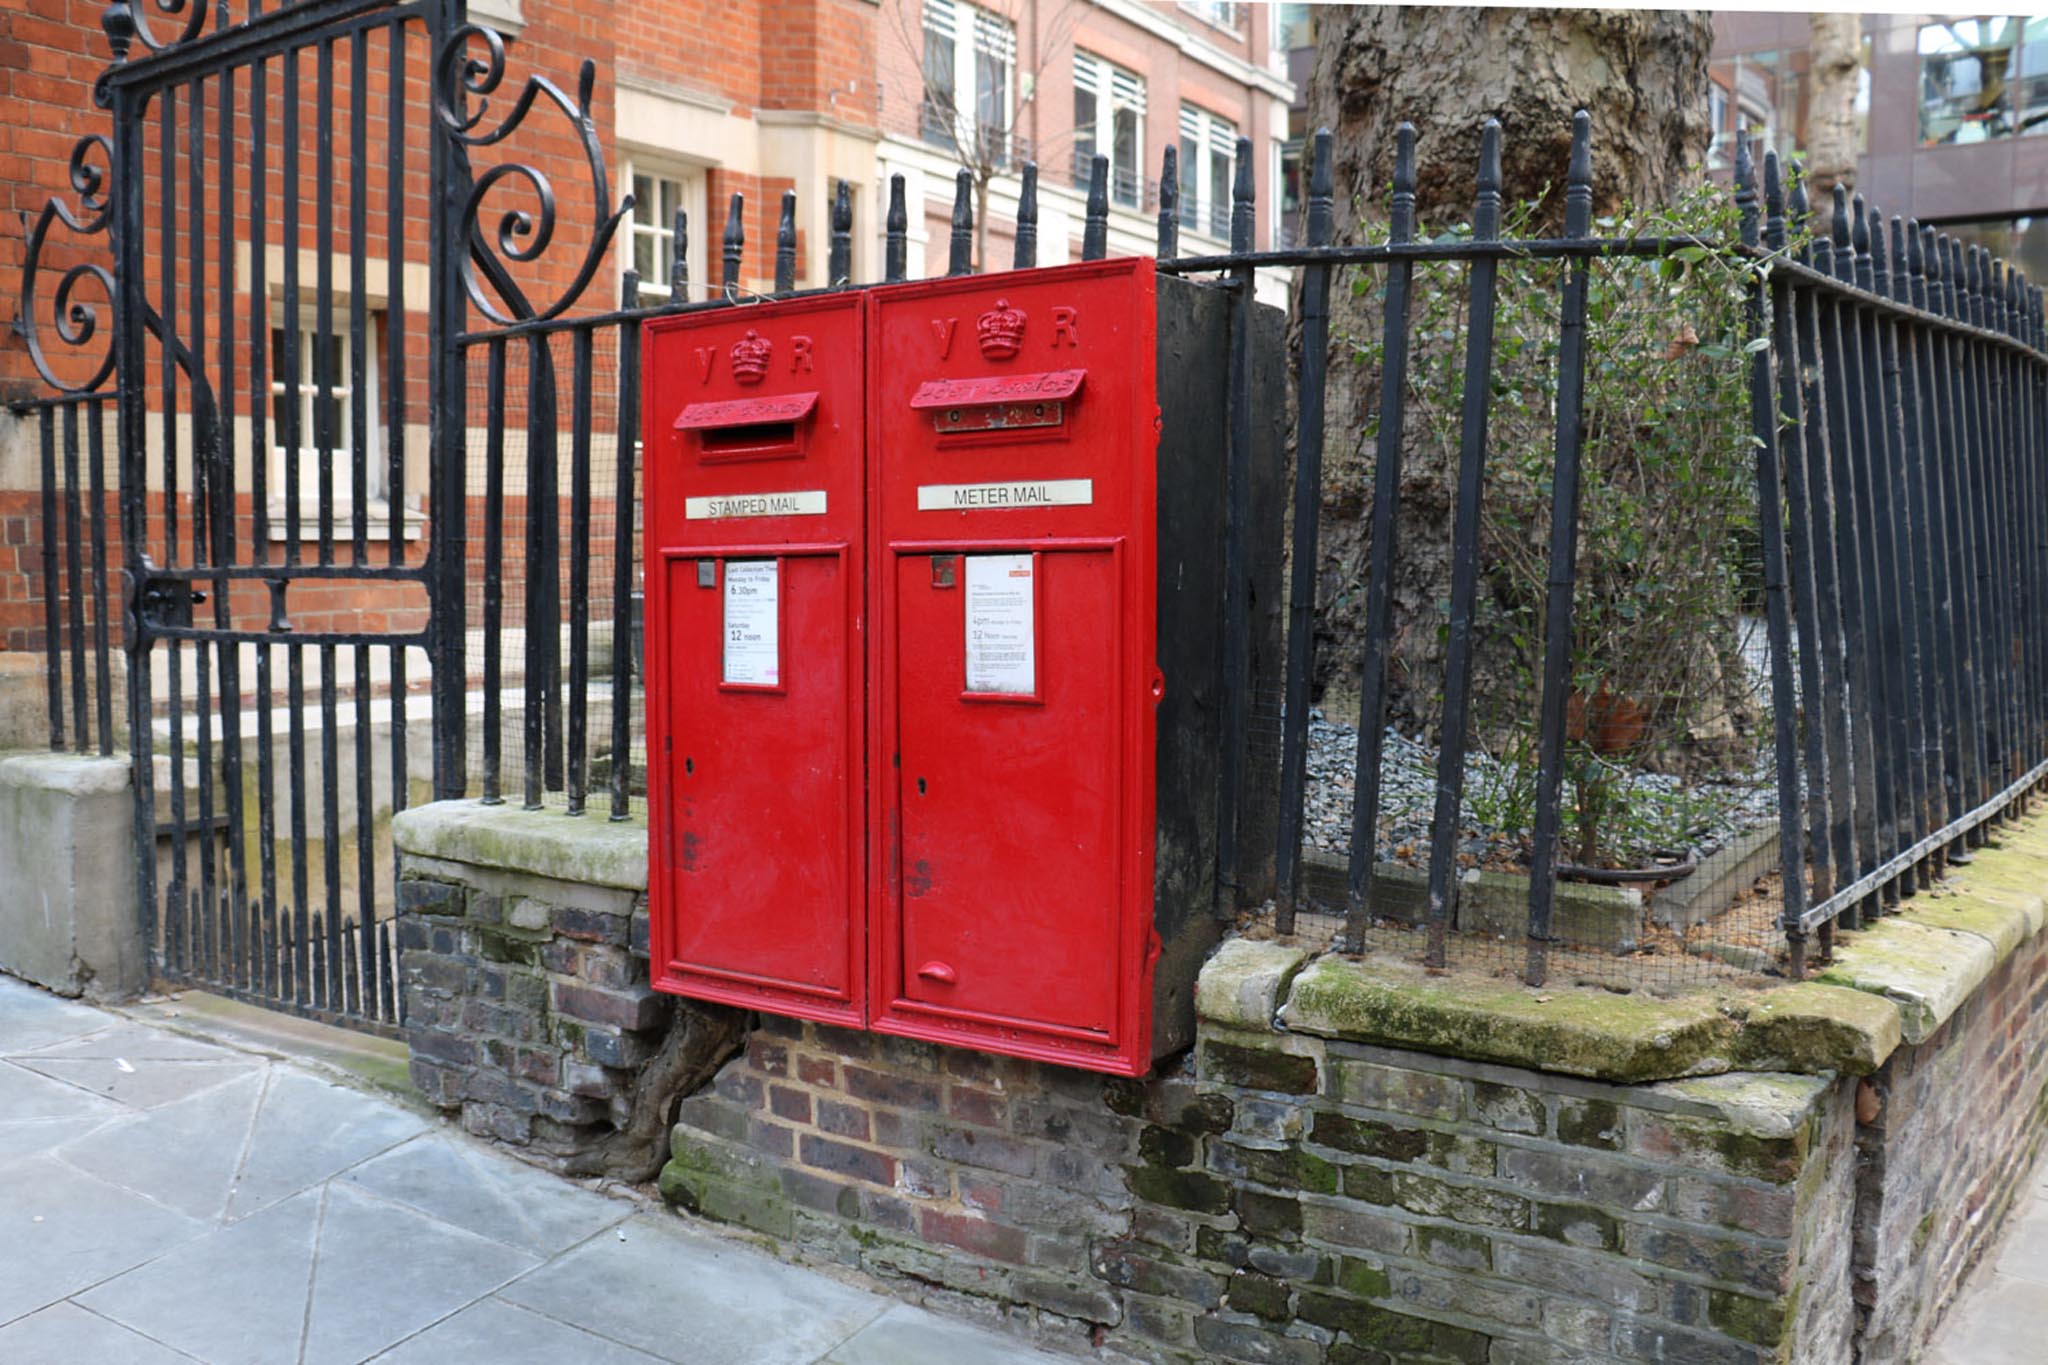 VR twin wall boxes, 1880s, London. Andrew R Young